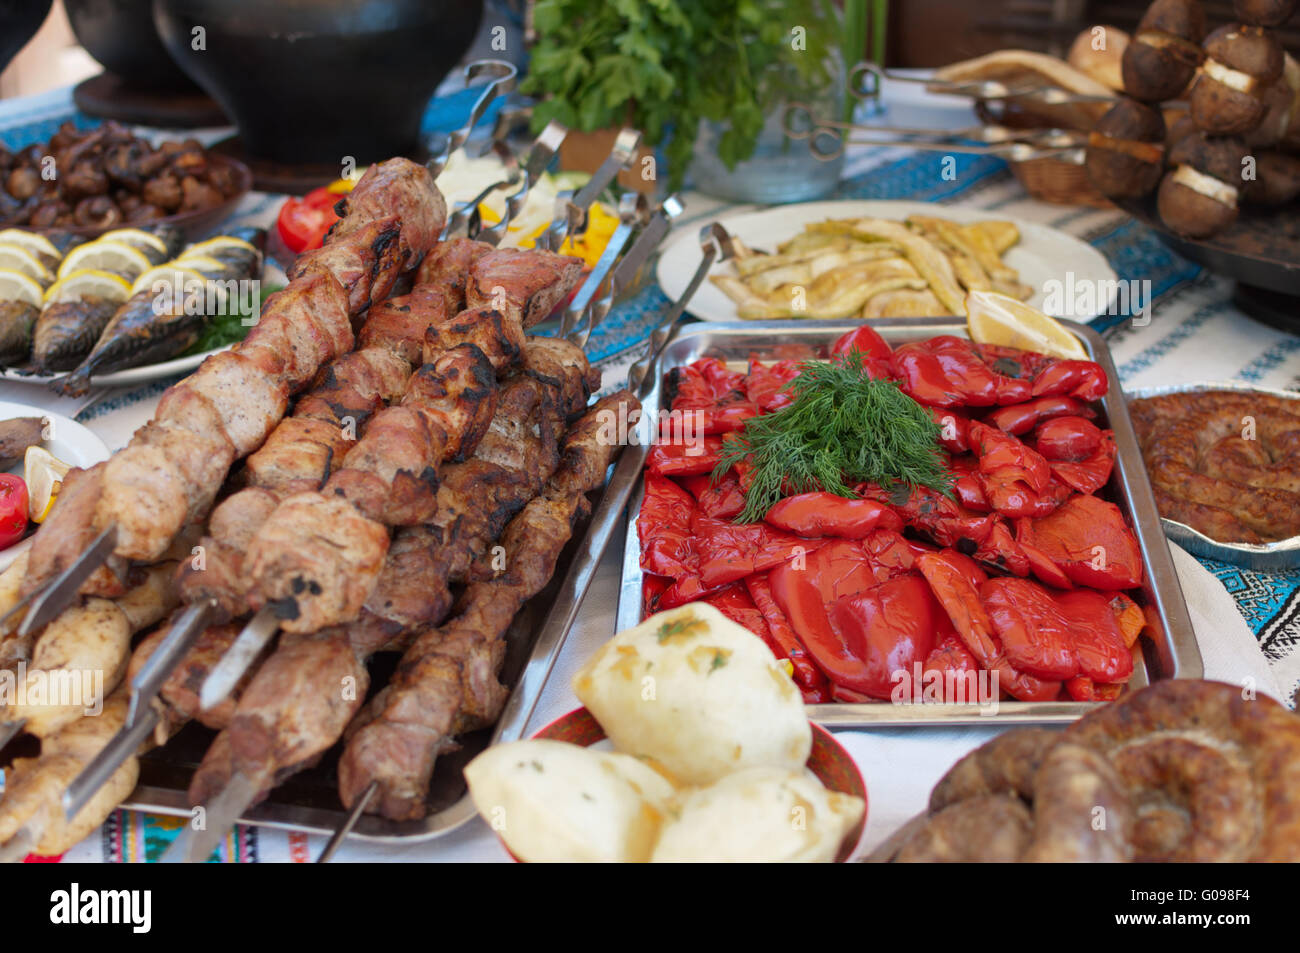 Meat and fish dishes with vegetables on the table. Stock Photo